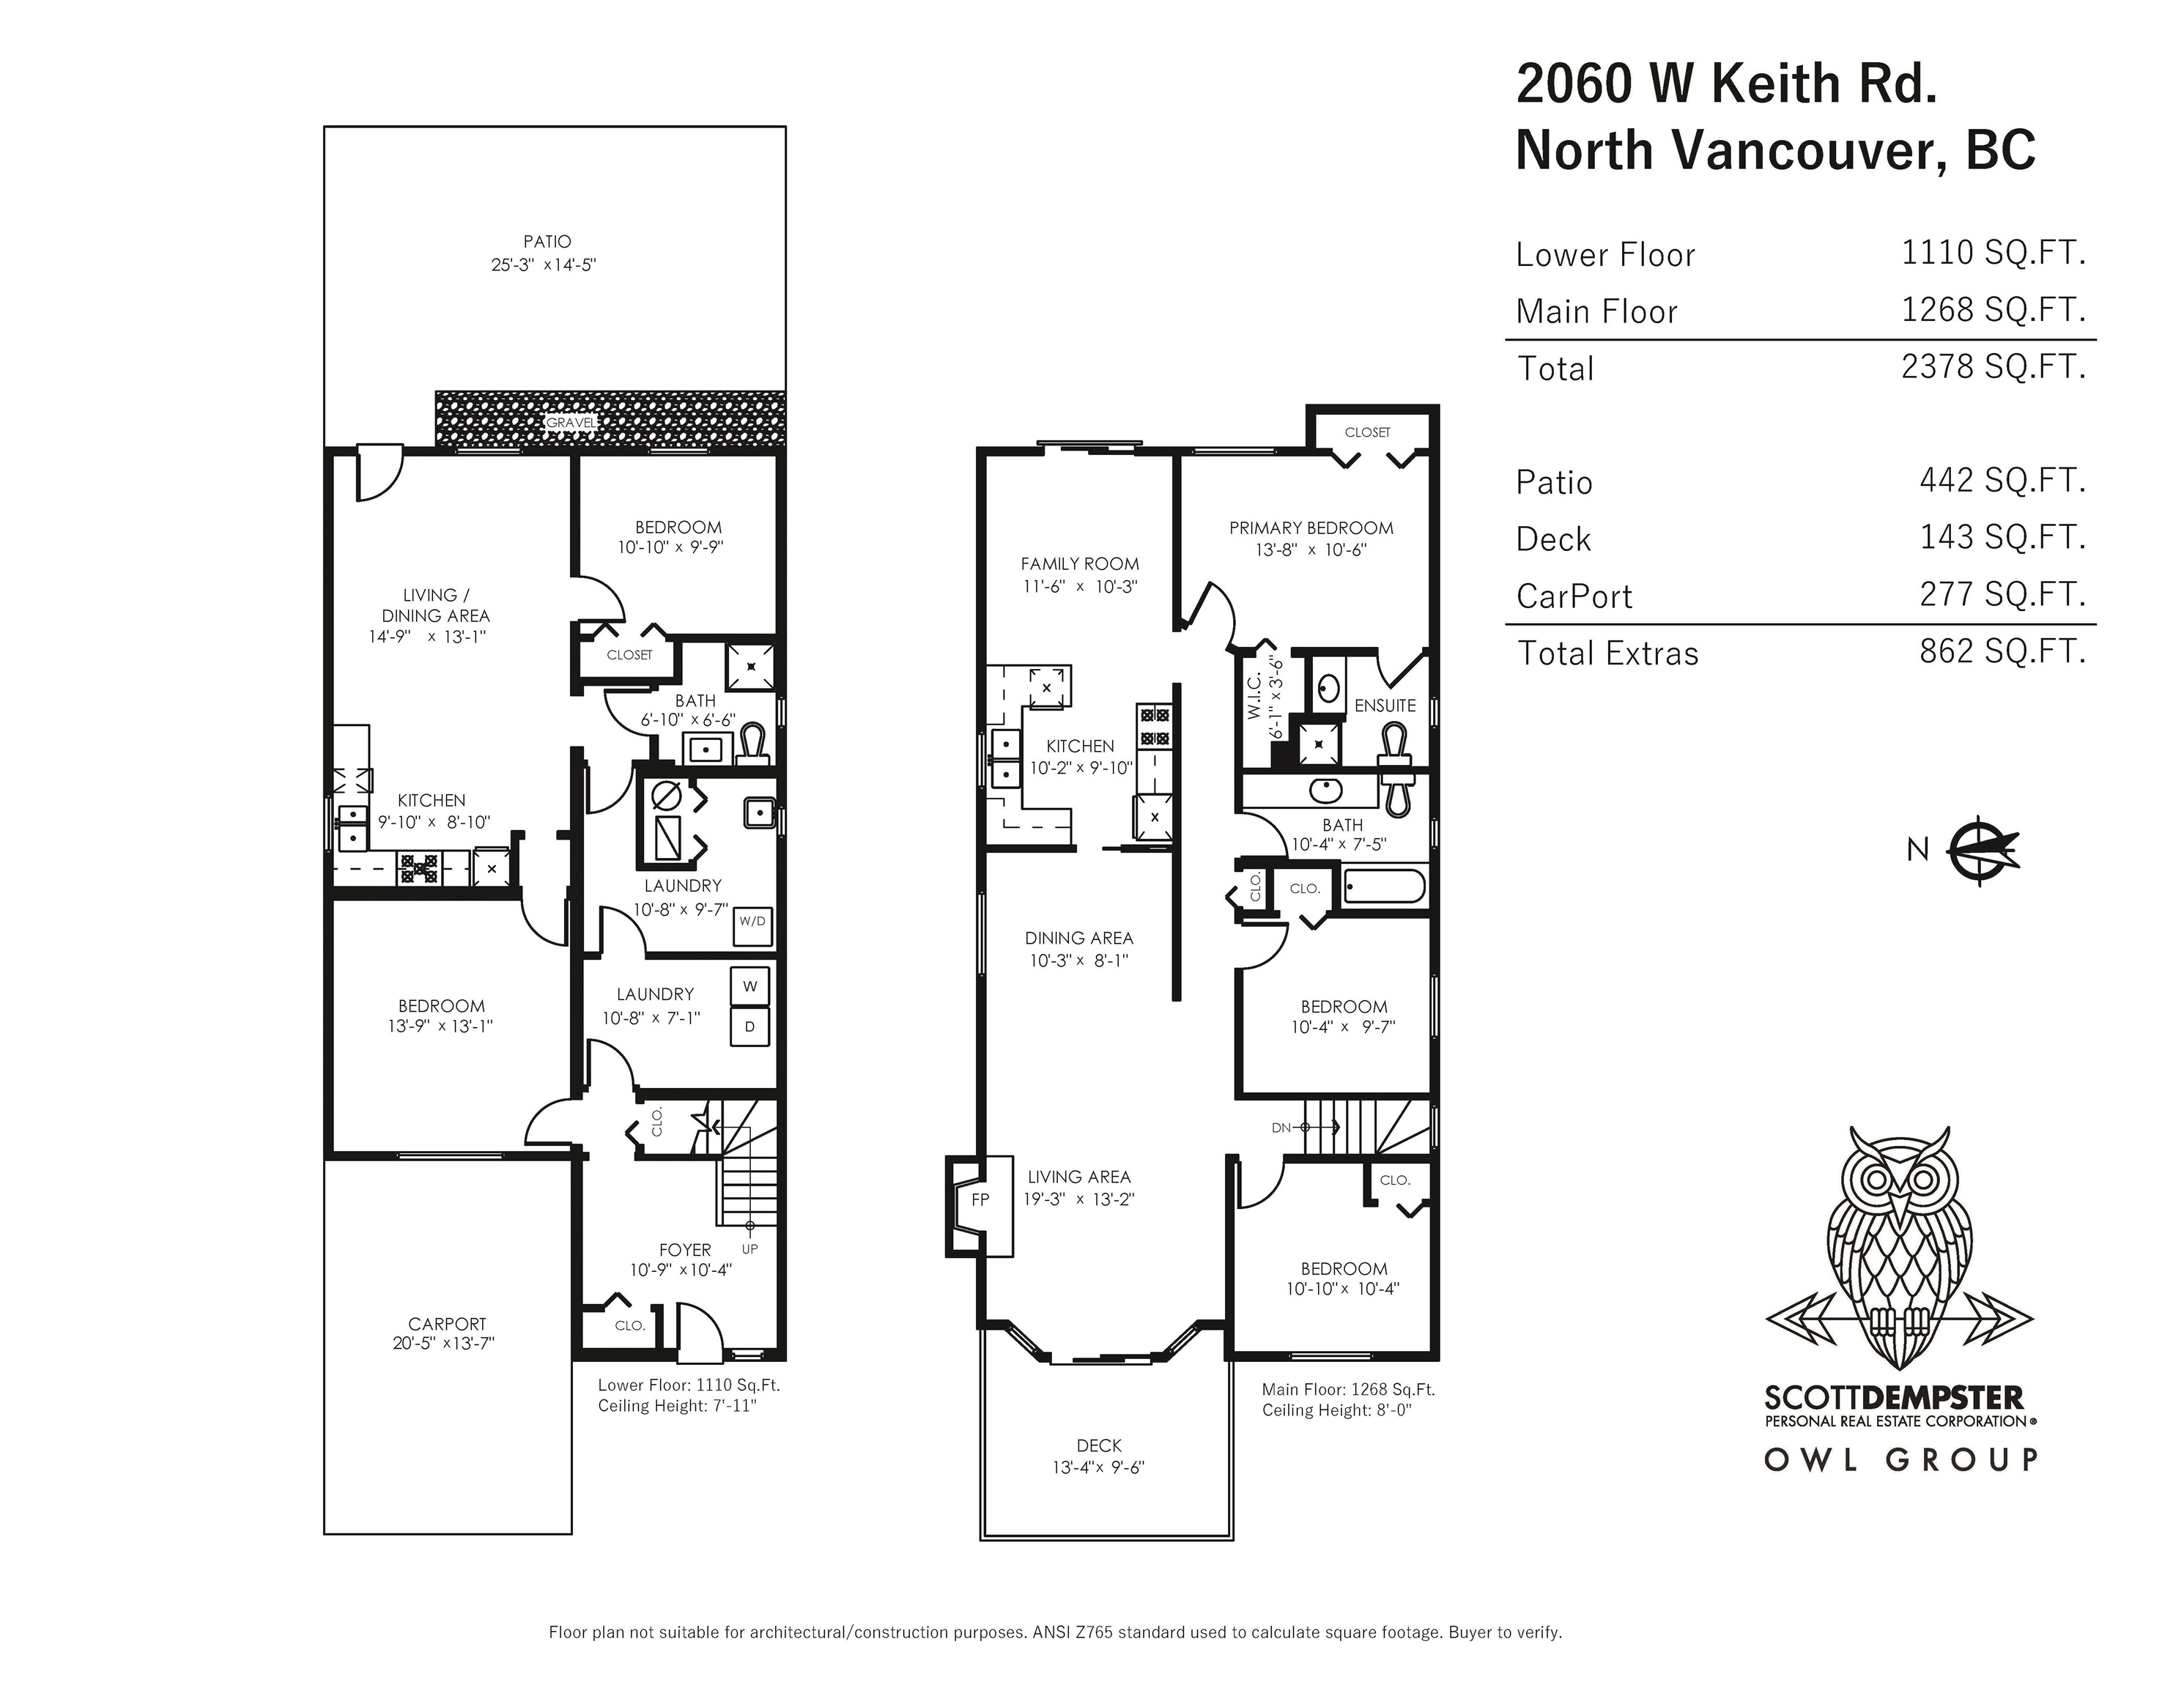 Listing image of 2060 W KEITH ROAD